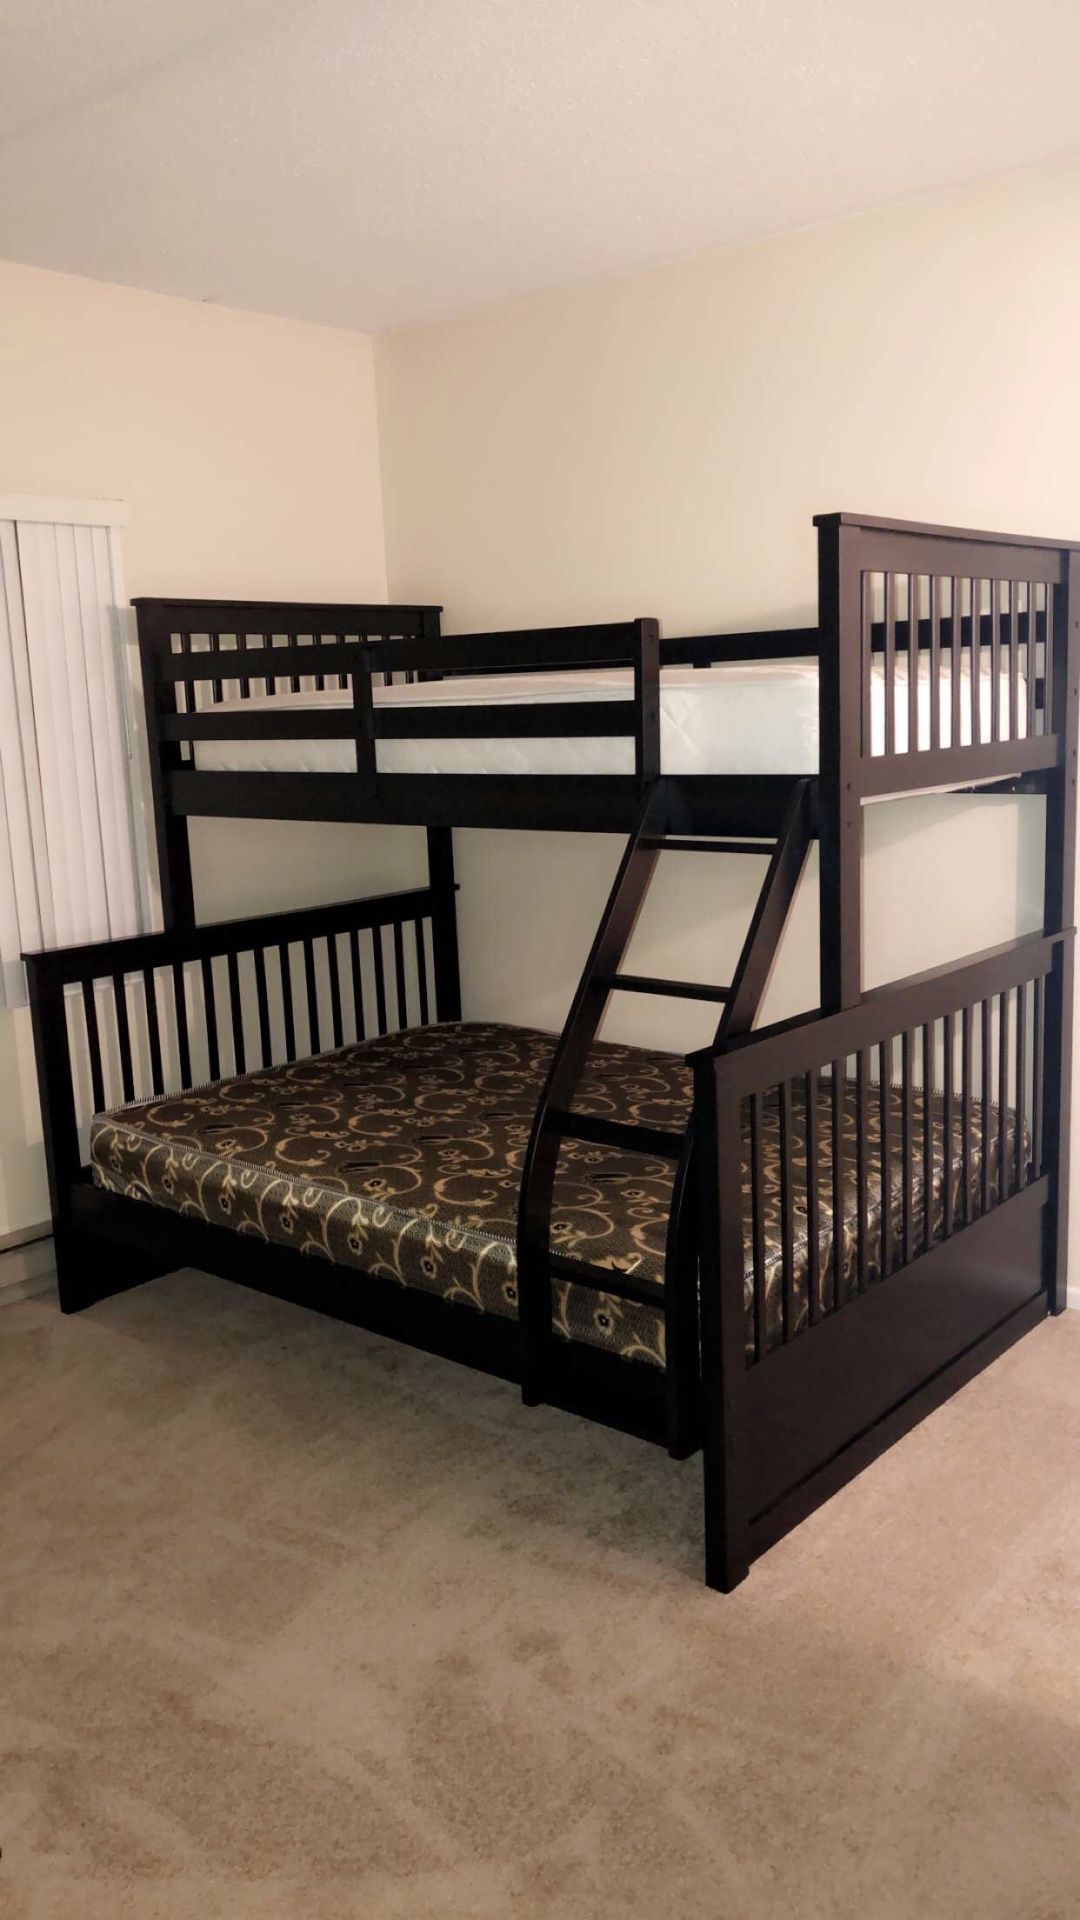 Black bunk bed (MATTRESSES NOT INCLUDED)